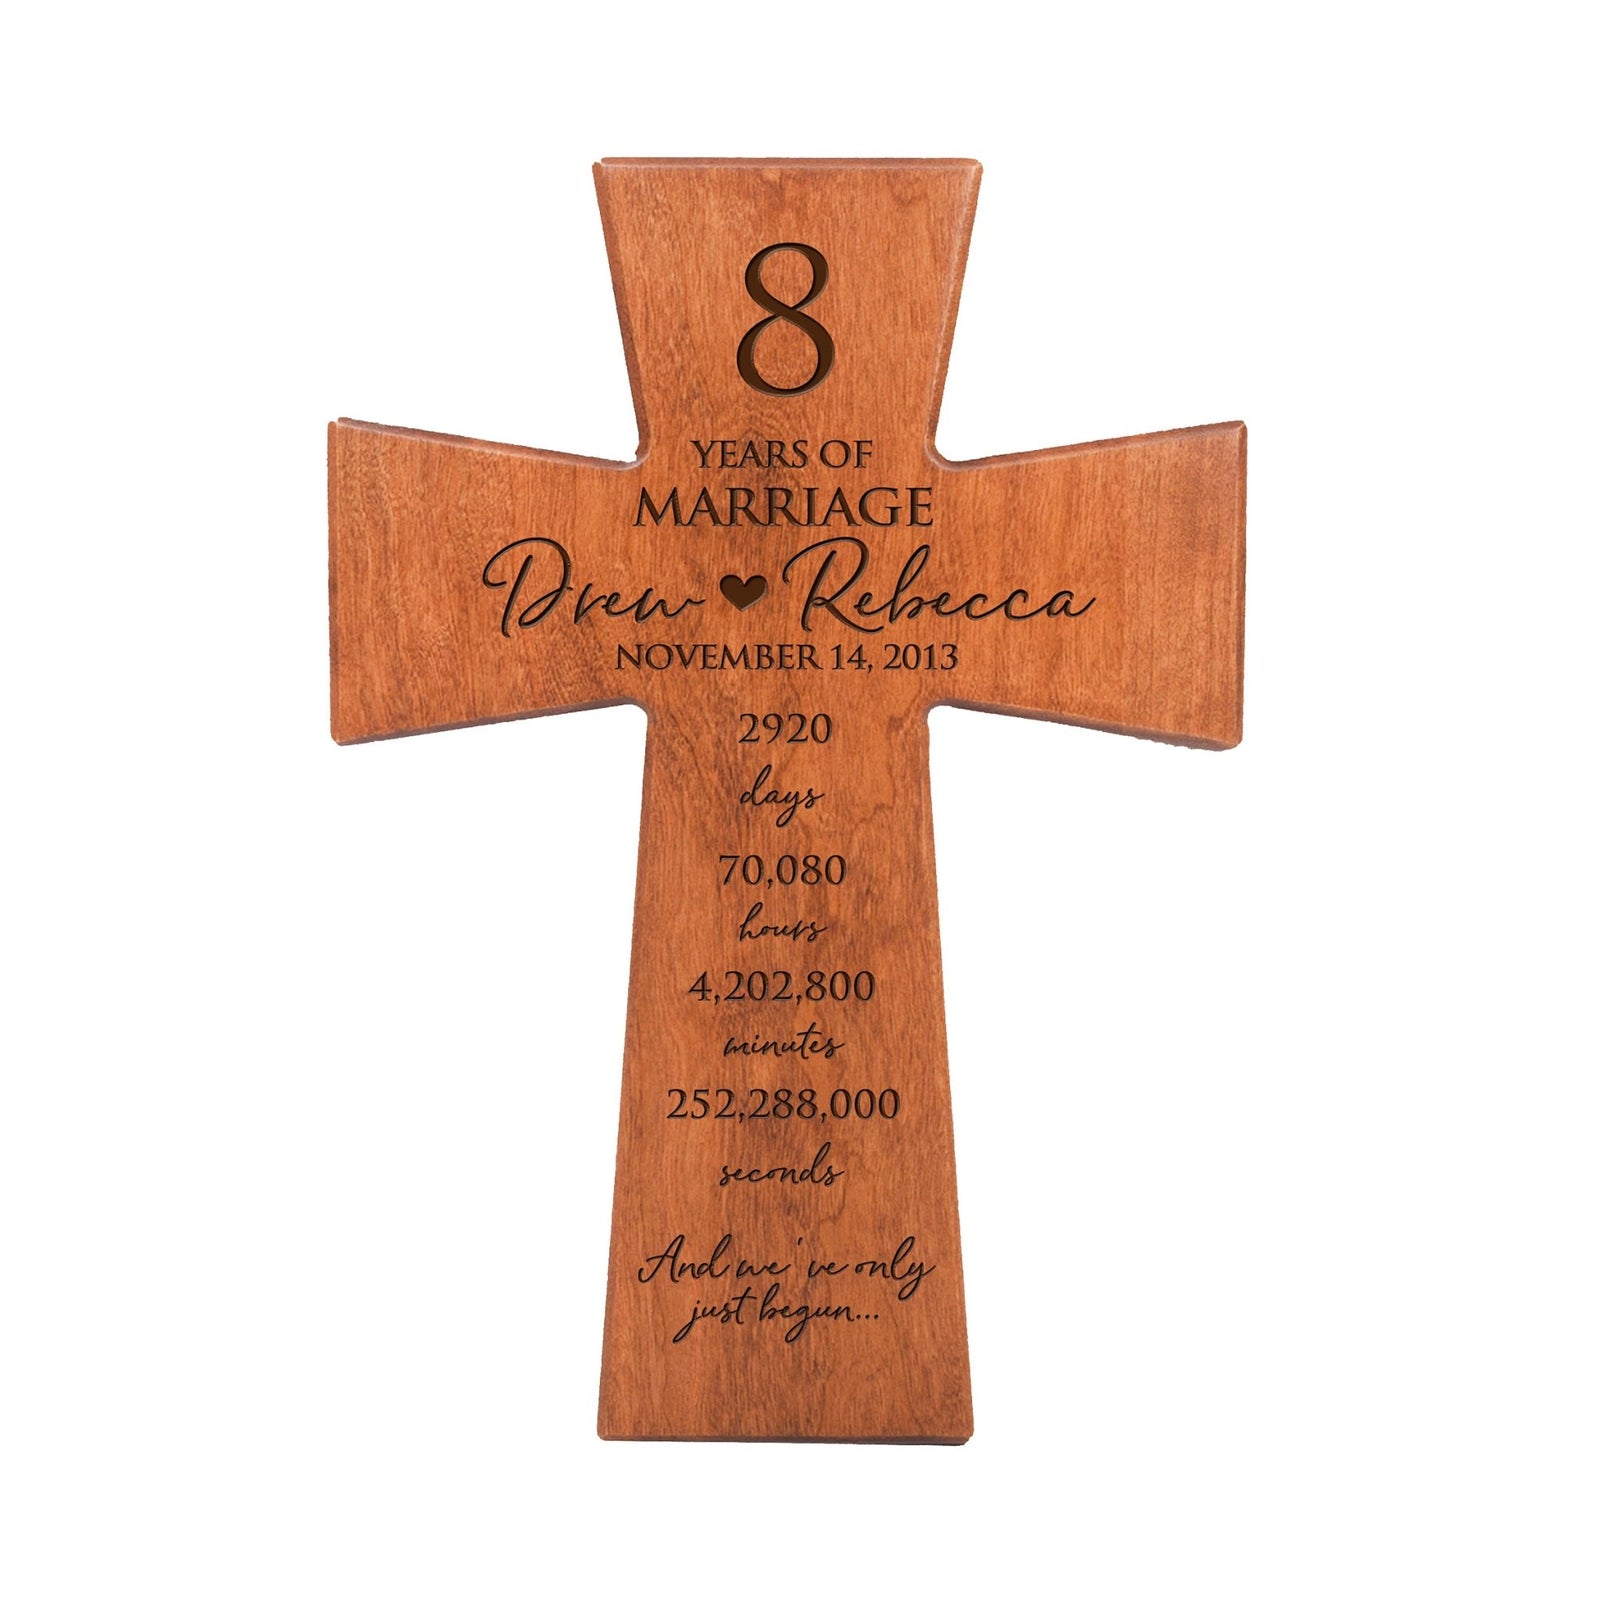 Lifesong Milestones Elegant Personalized Wall Cross - Perfect for 8th Wedding Anniversary